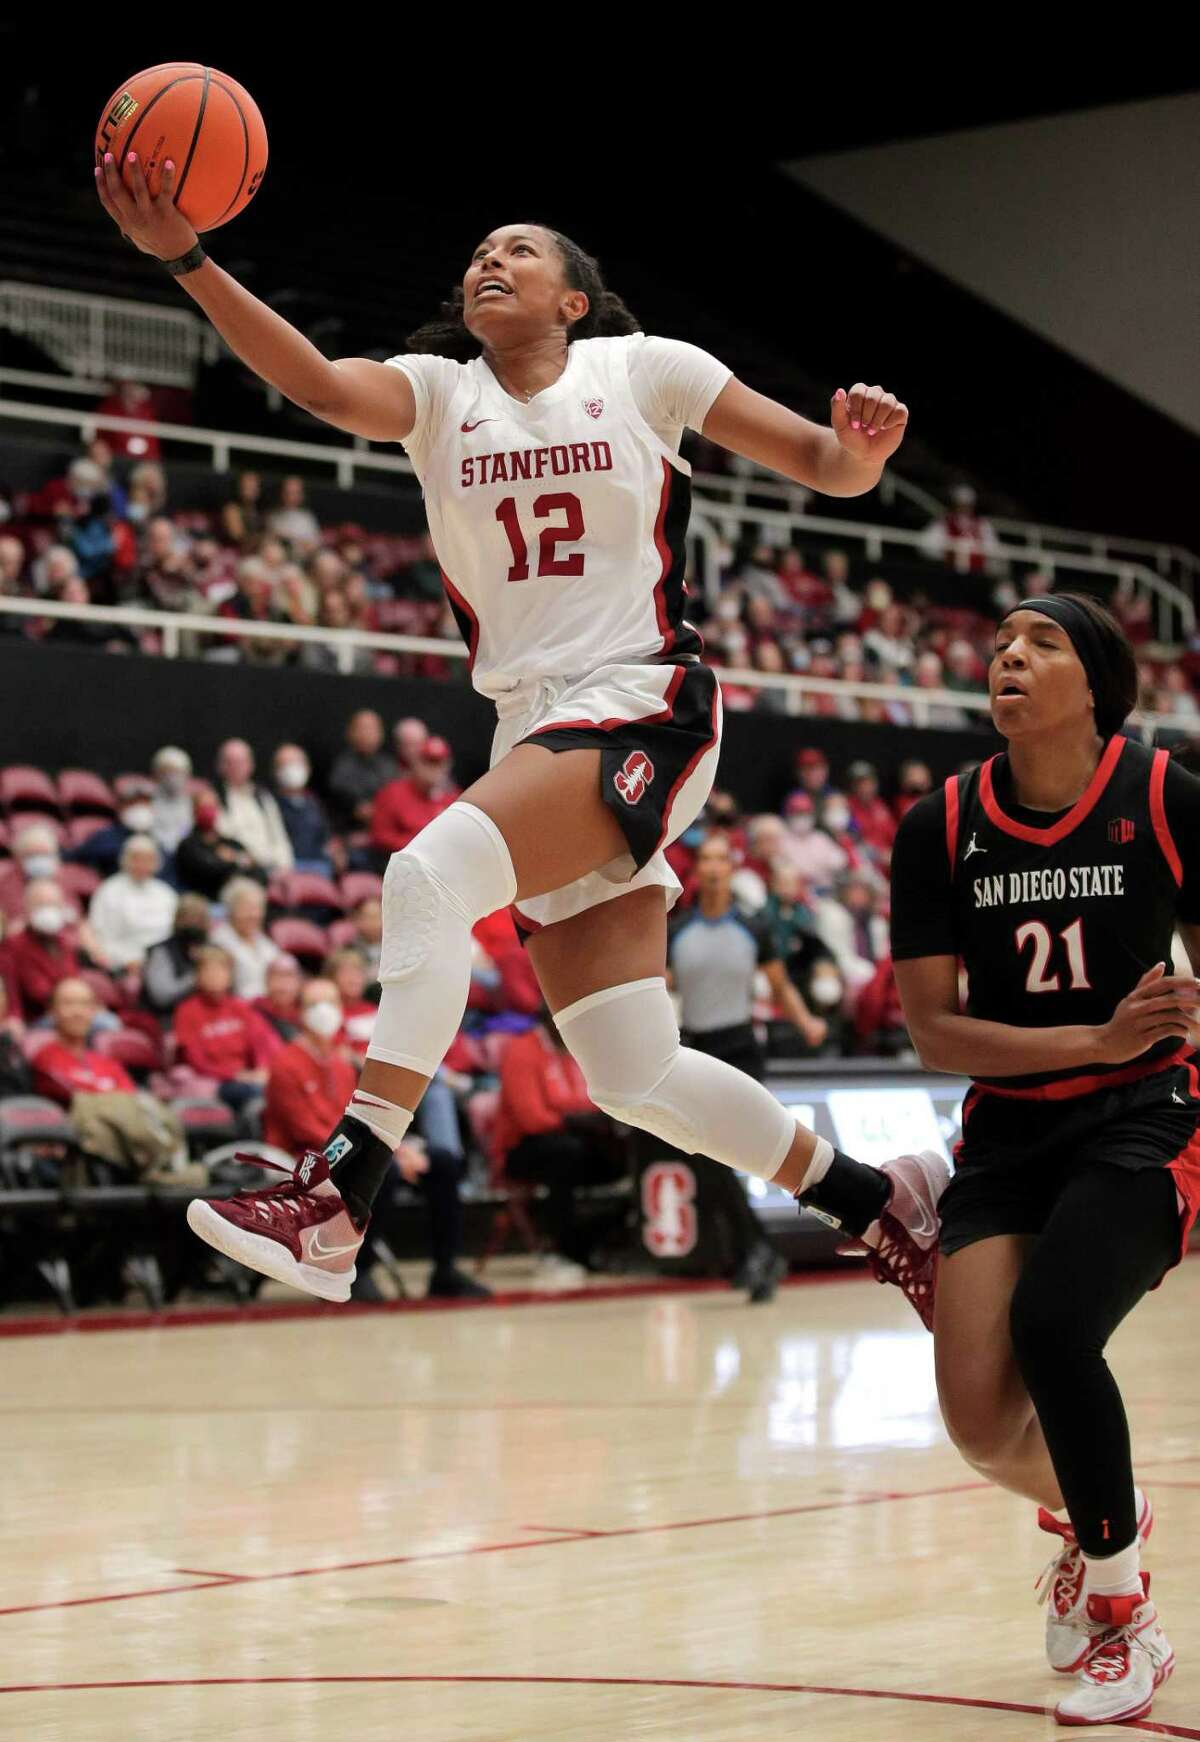 Stanford’s Indya Nivar (12) drives in for a layup after a steal past Alex Crain (21) In the first half as the Stanford Cardinal played the San Diego State Aztecs at Maples Pavilion in Stanford, Calif., on Monday, November 07, 2022.